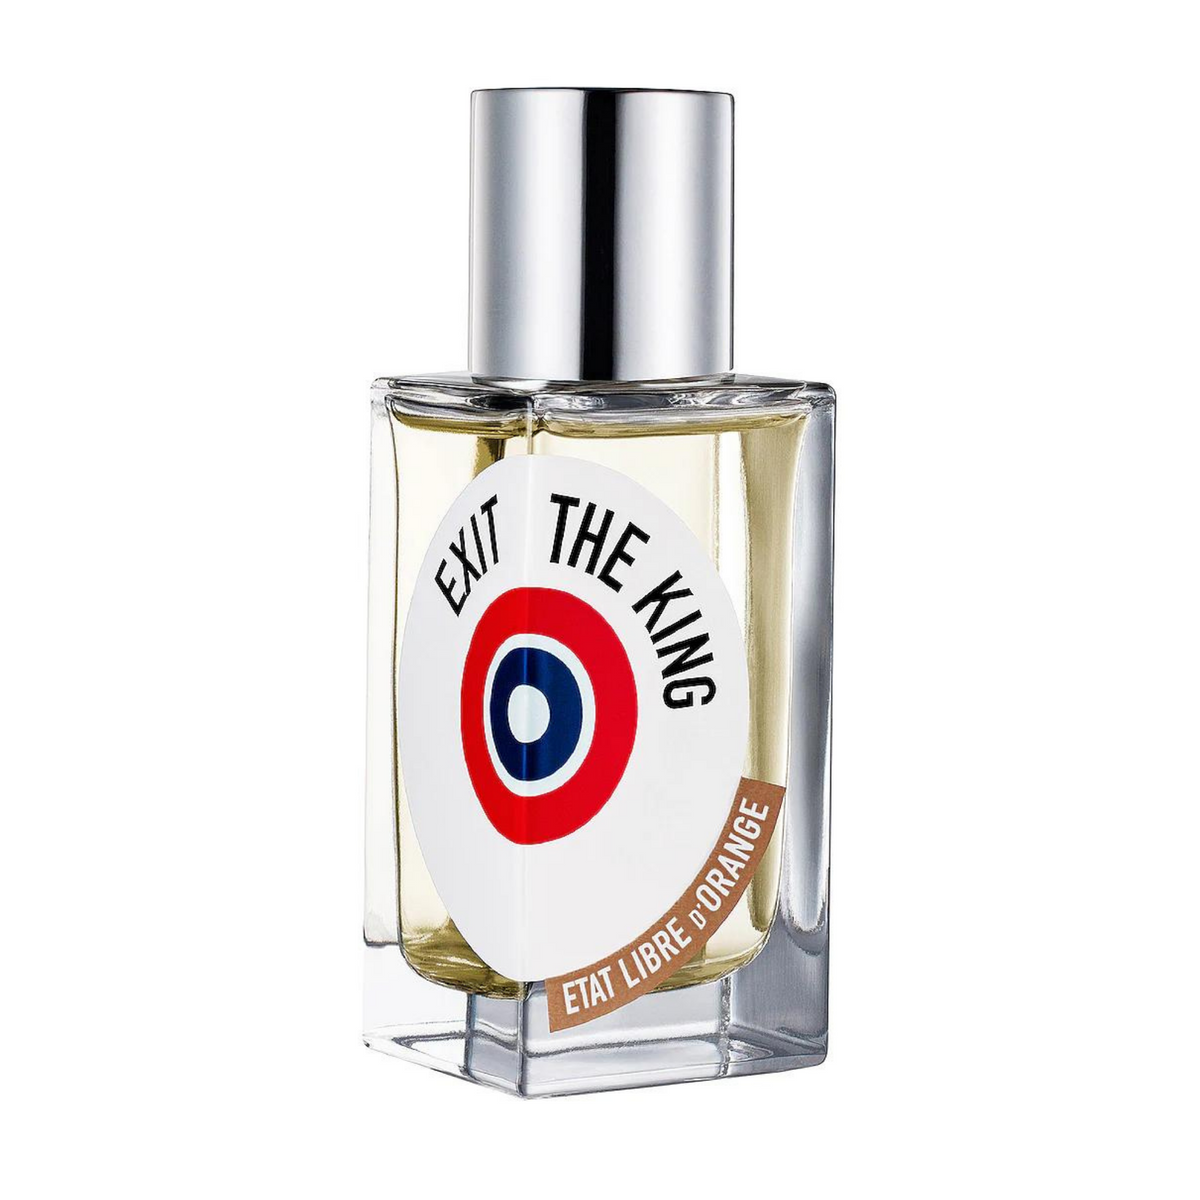 Primary Image of Exit The King EDP 100 ml